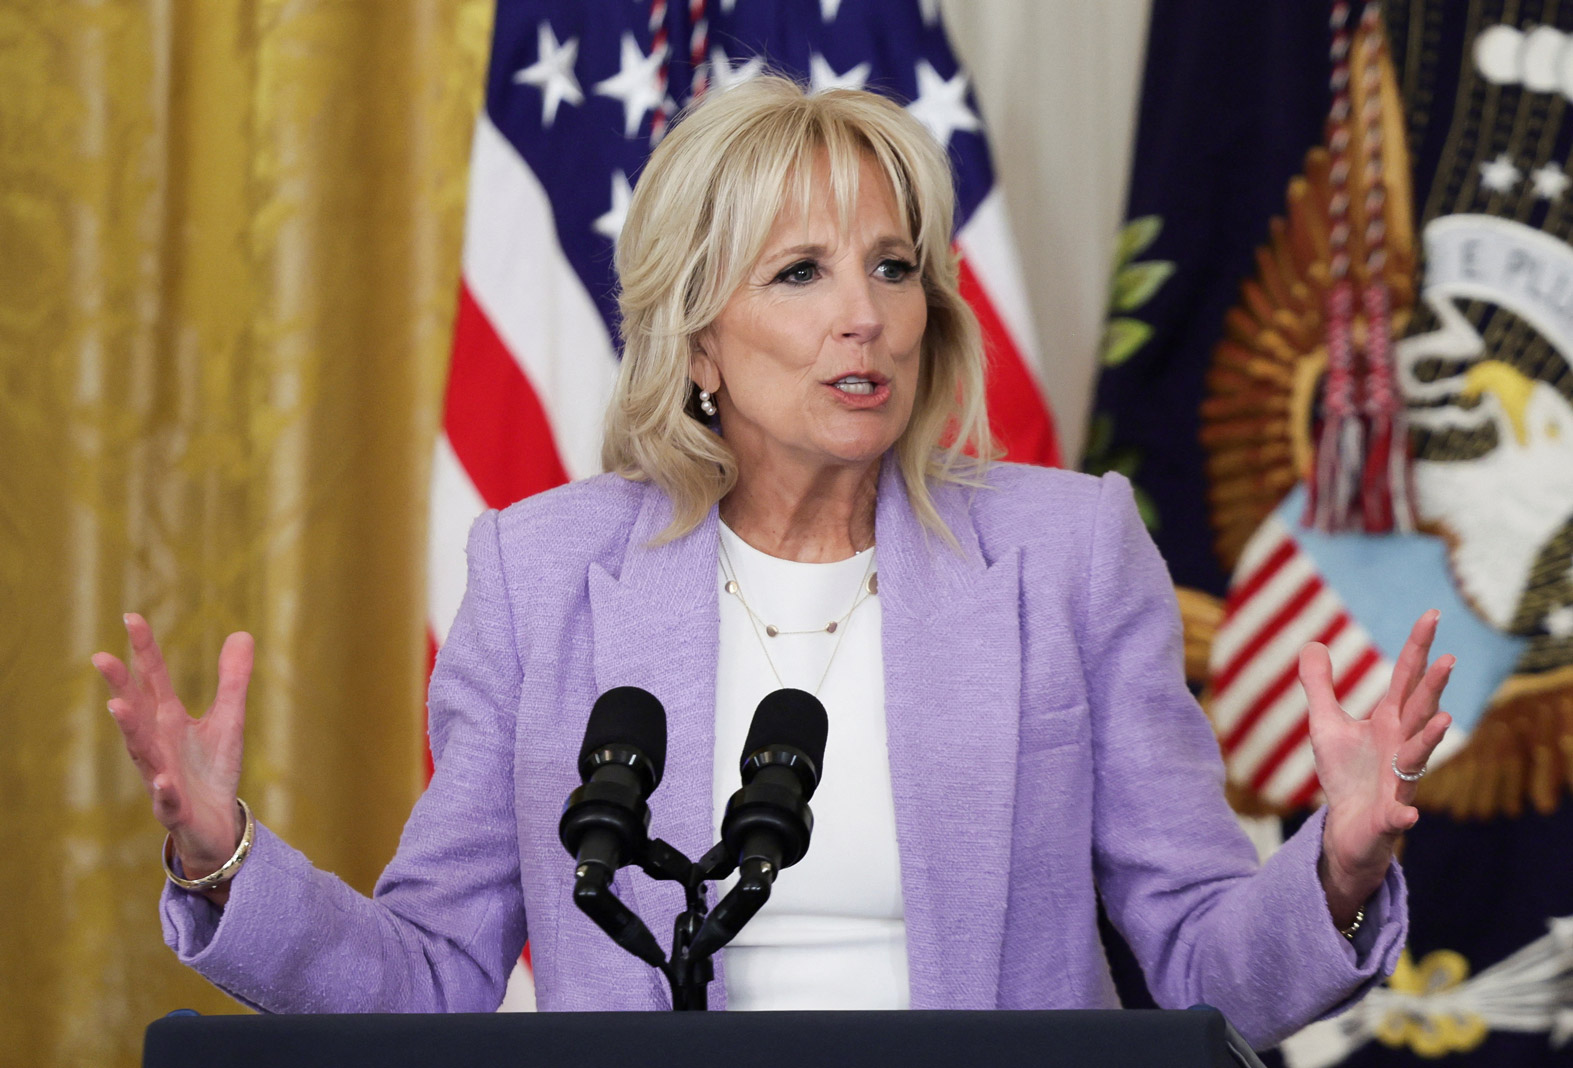 First Lady Jill Biden delivers remarks during the Council of Chief State School Officers' 2022 National and State Teachers of the Year event, in the White House, on Apr. 27